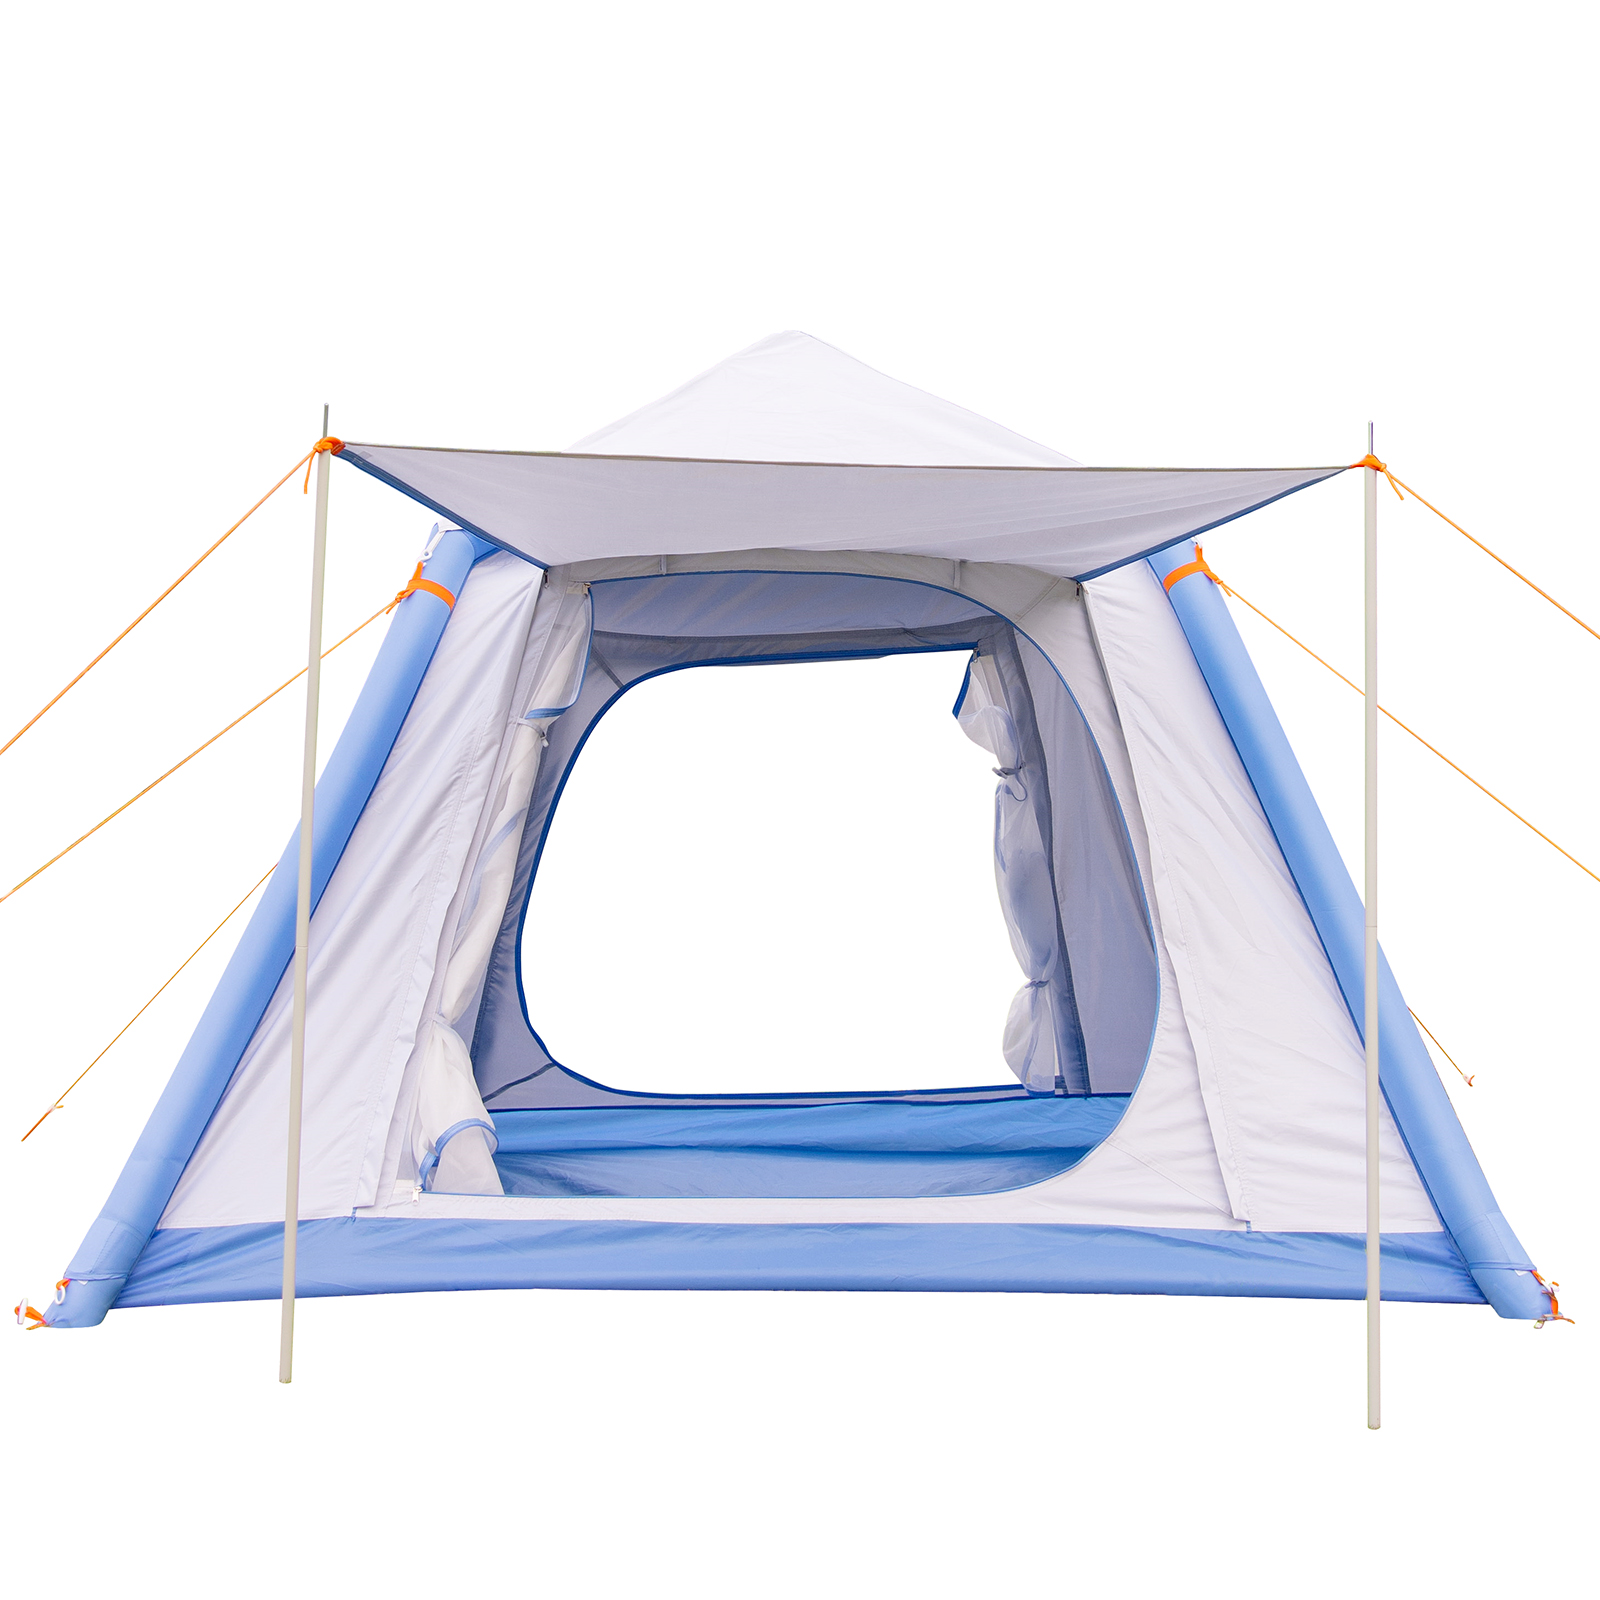 Double Person Automatic Inflatable Tent, Glamping Tent Camping Yurt with 8cm TPU White Bracket for Camping and Beach, Blue and Off-White Color